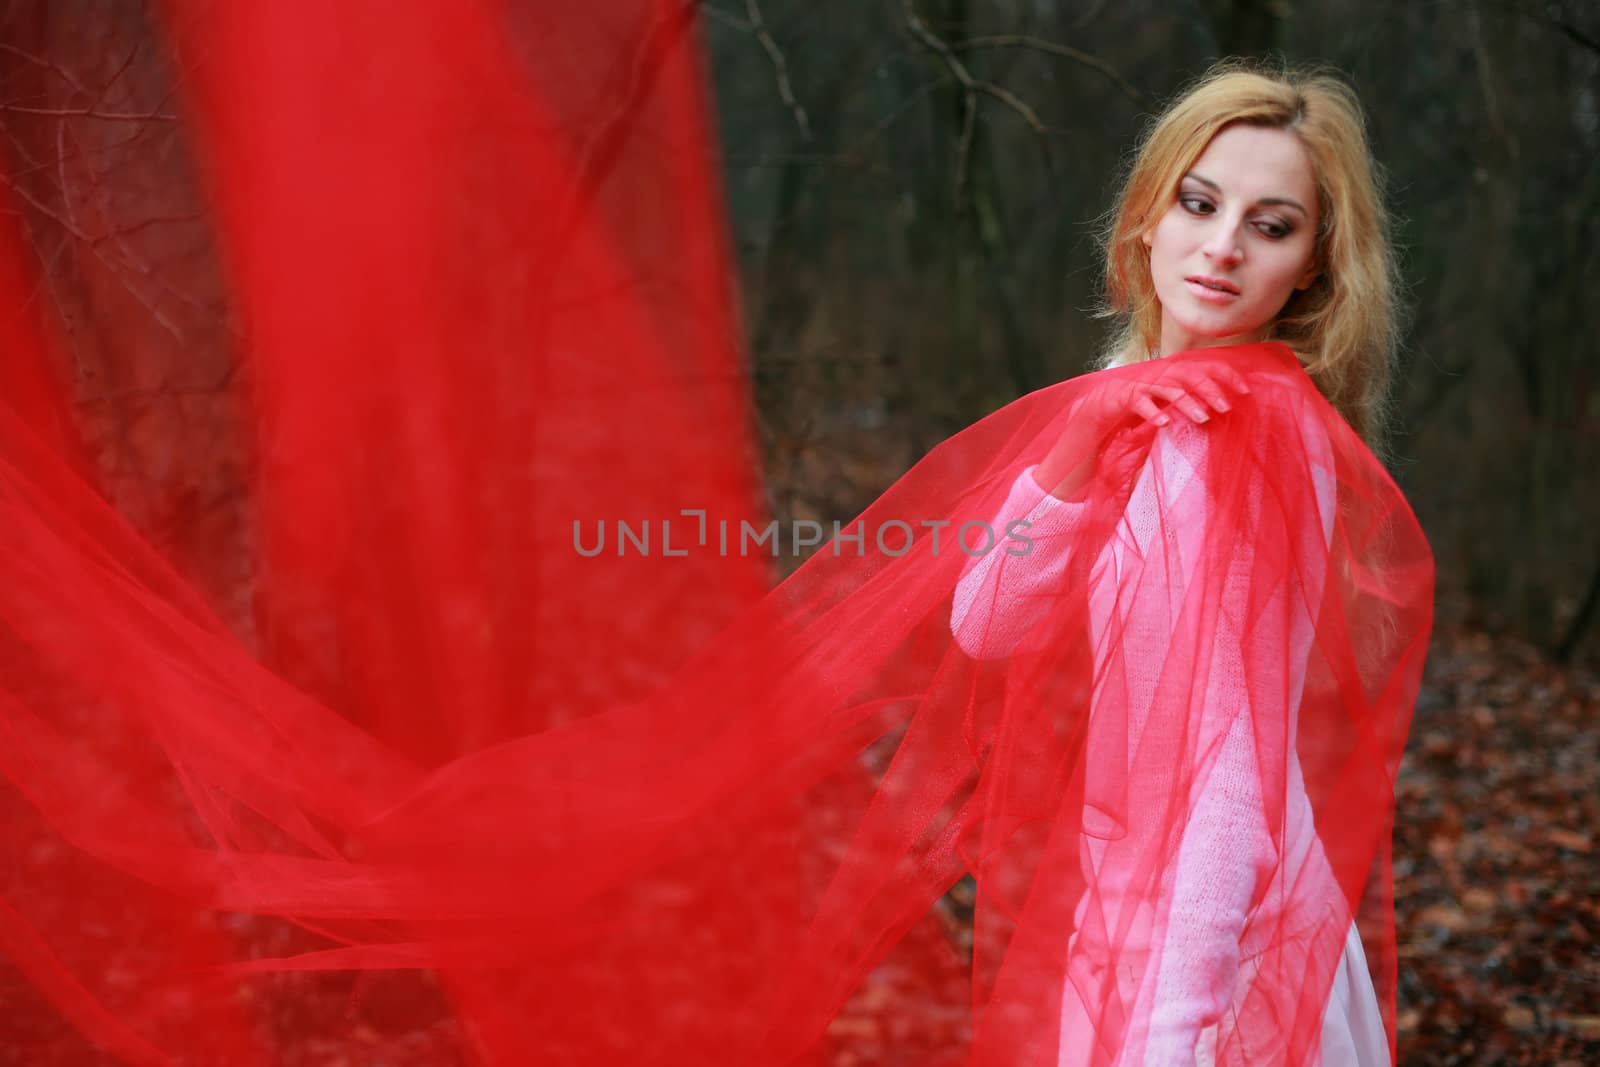 A beautiful young woman with a red shawl